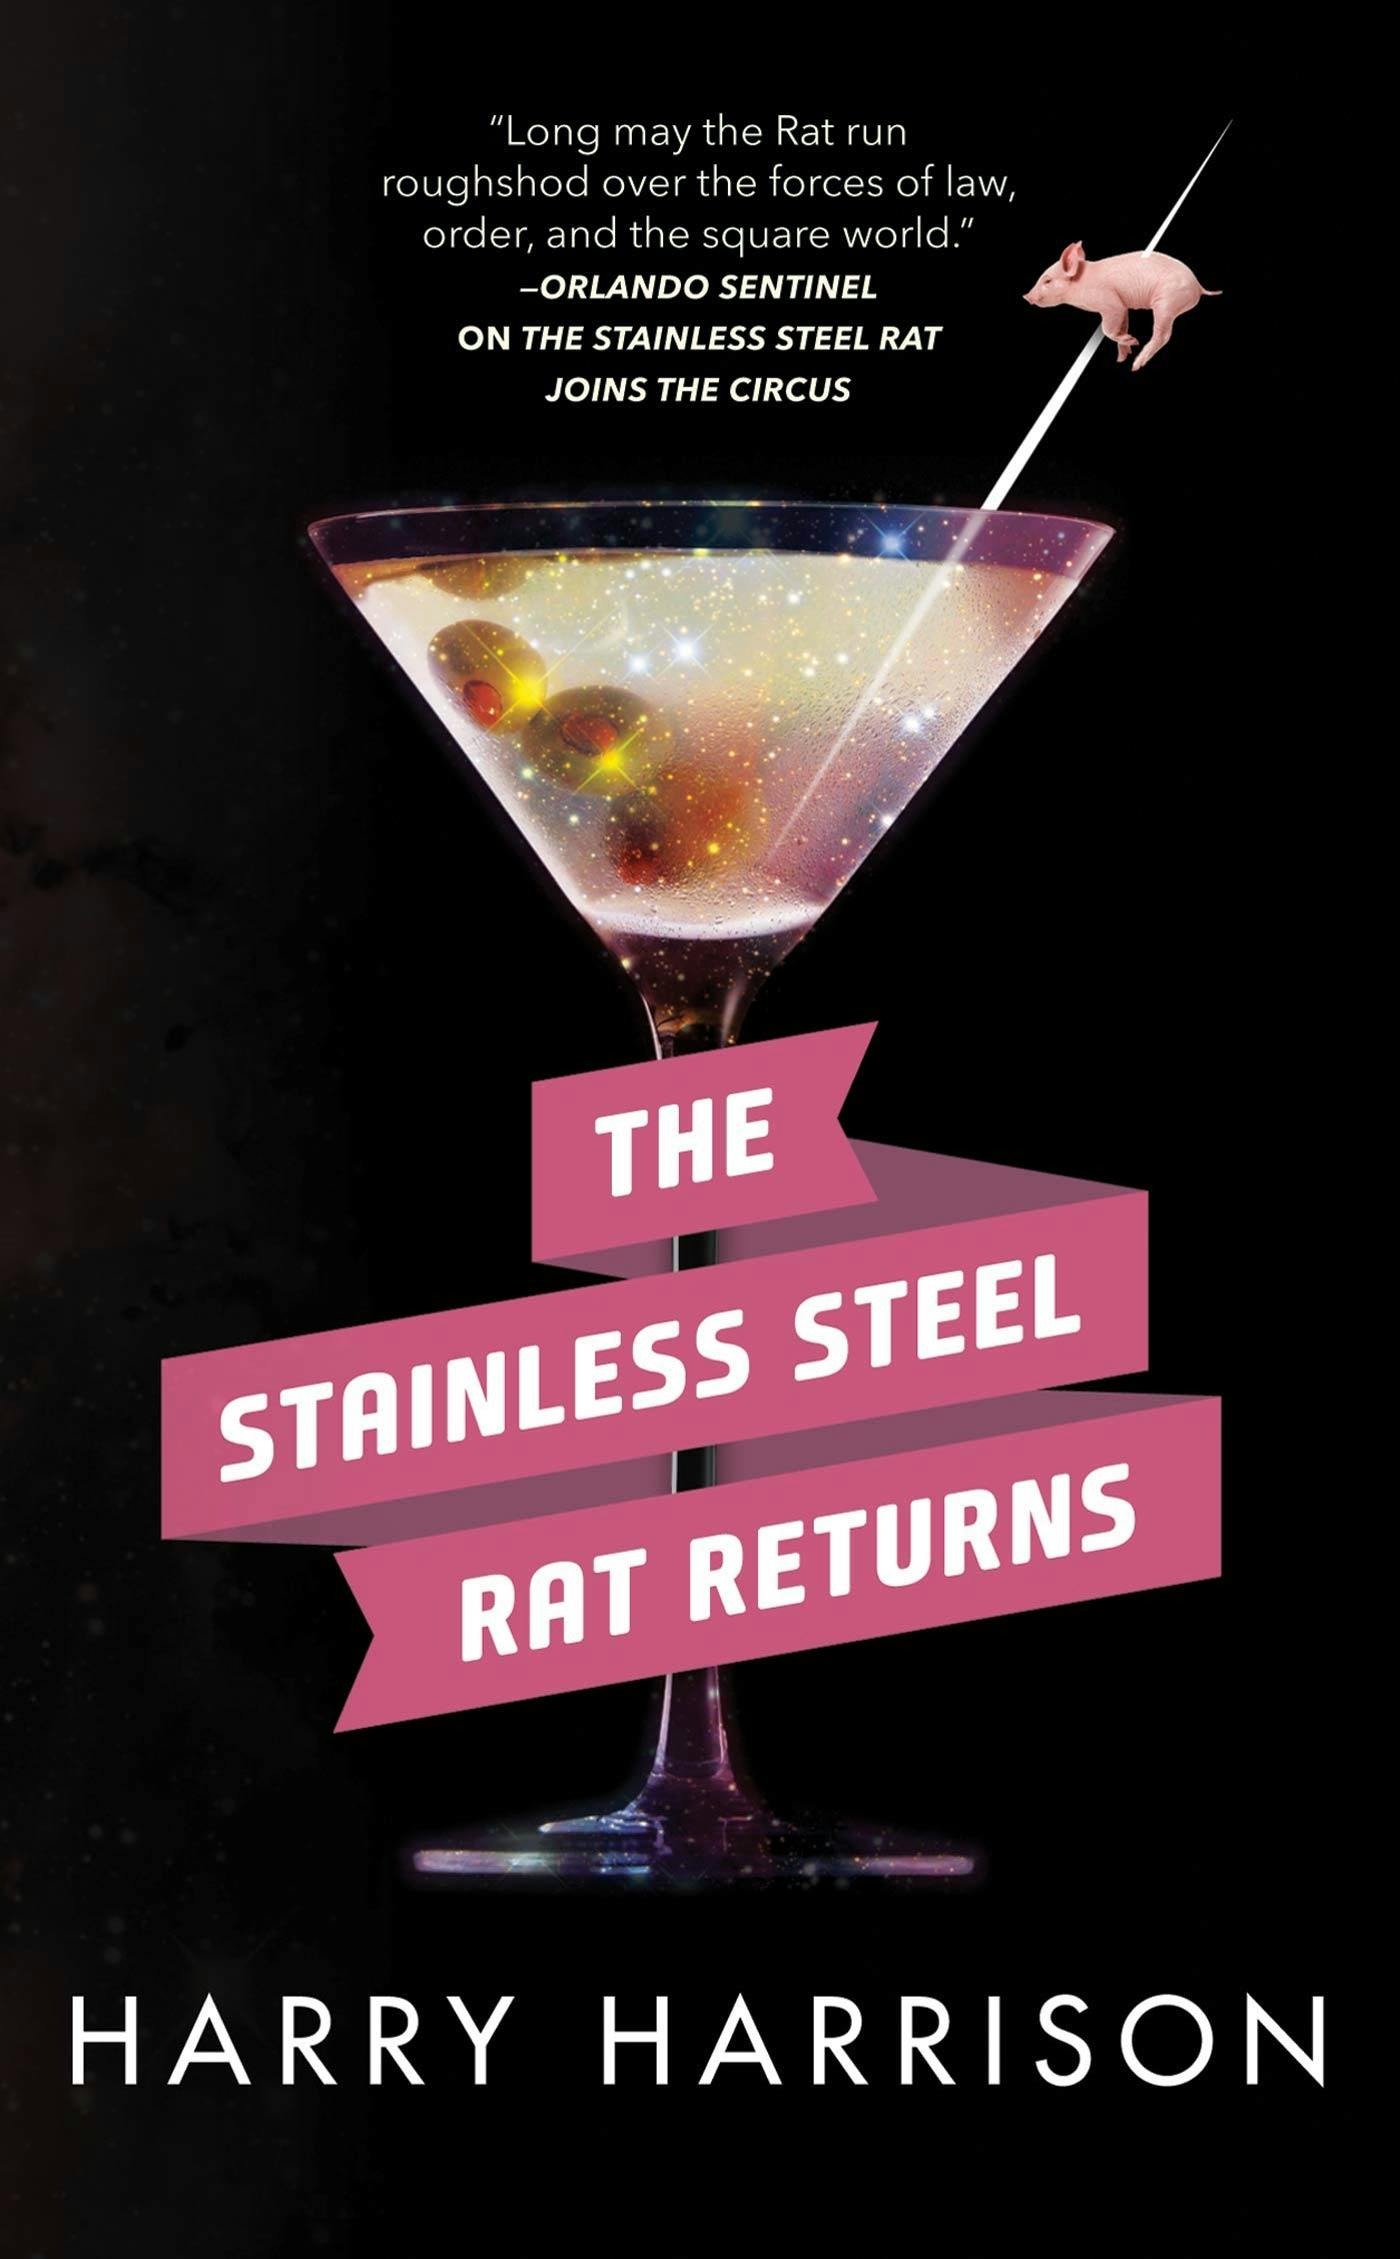 Image of The Stainless Steel Rat Returns